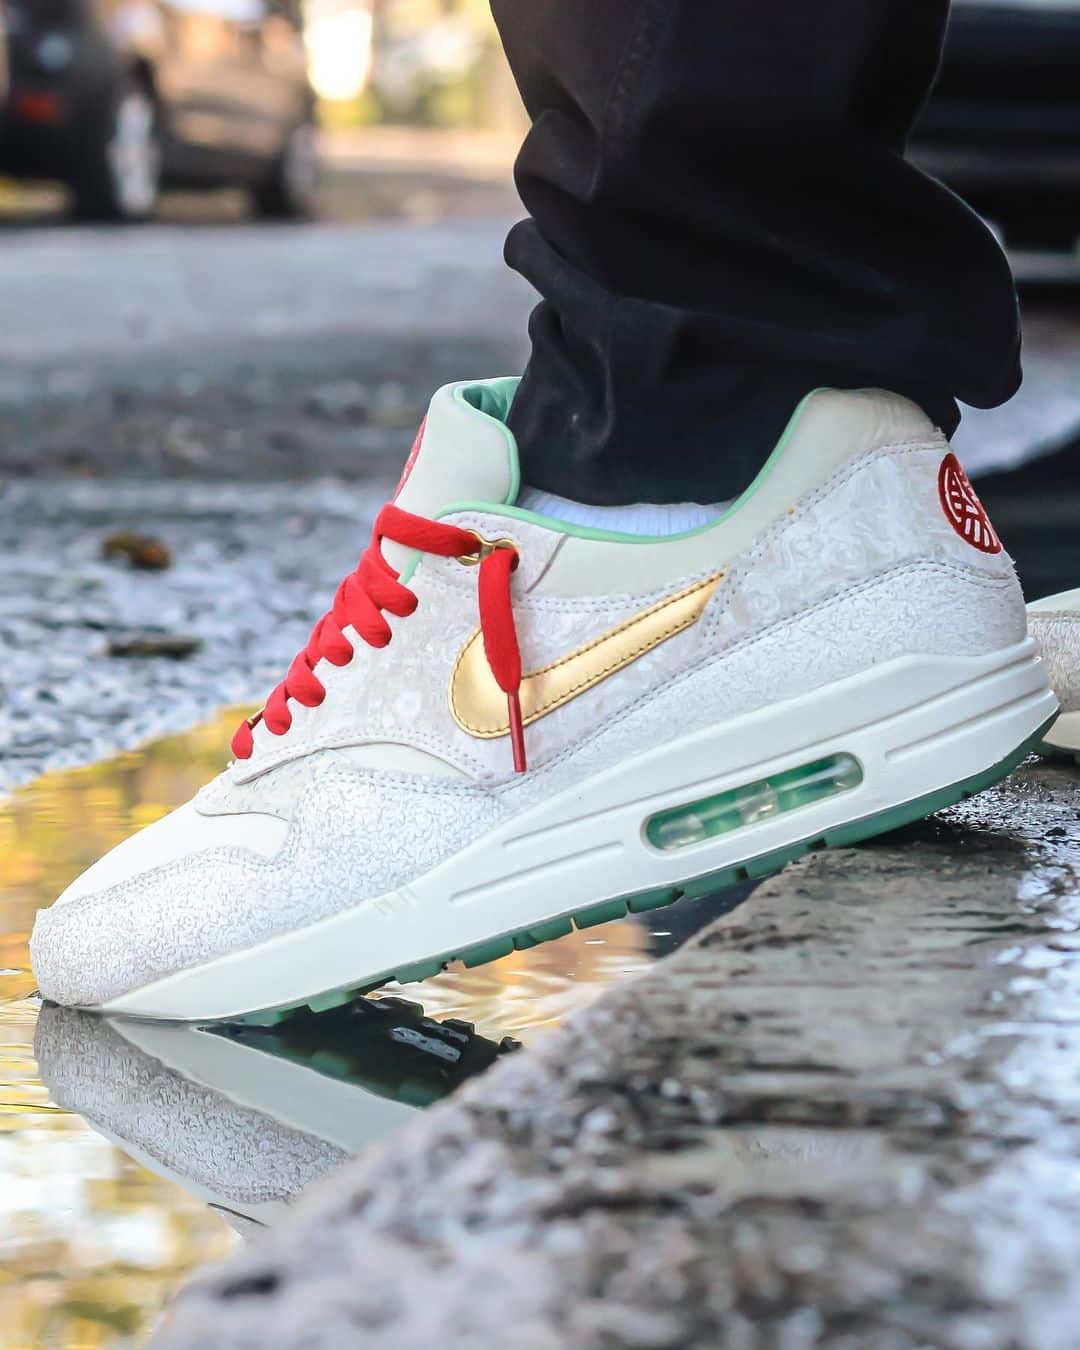 2014 - Nike Air Max 1 Year of the Horse @dsince81 (1)